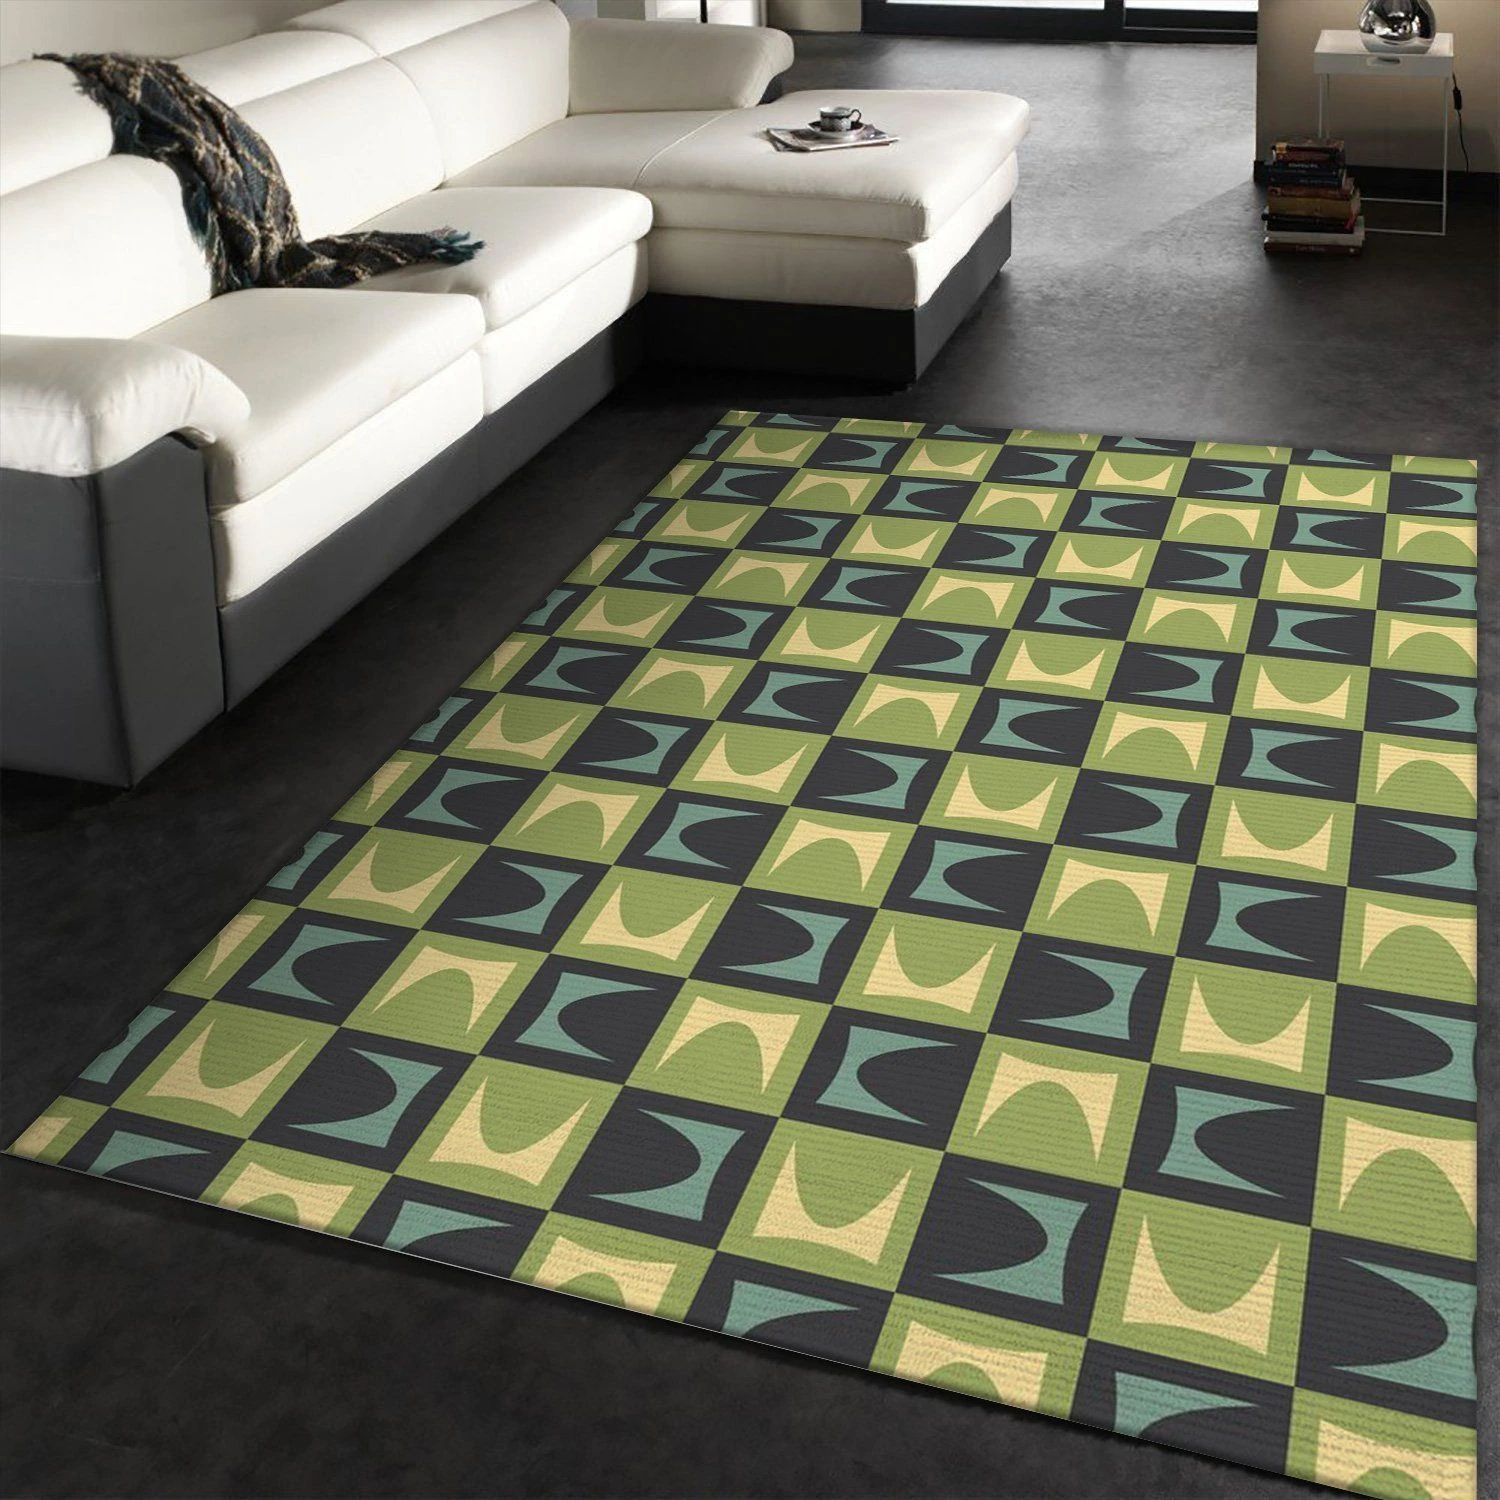 Midcentury Pattern 25 Area Rug, Living room and bedroom Rug, Christmas Gift US Decor - Indoor Outdoor Rugs